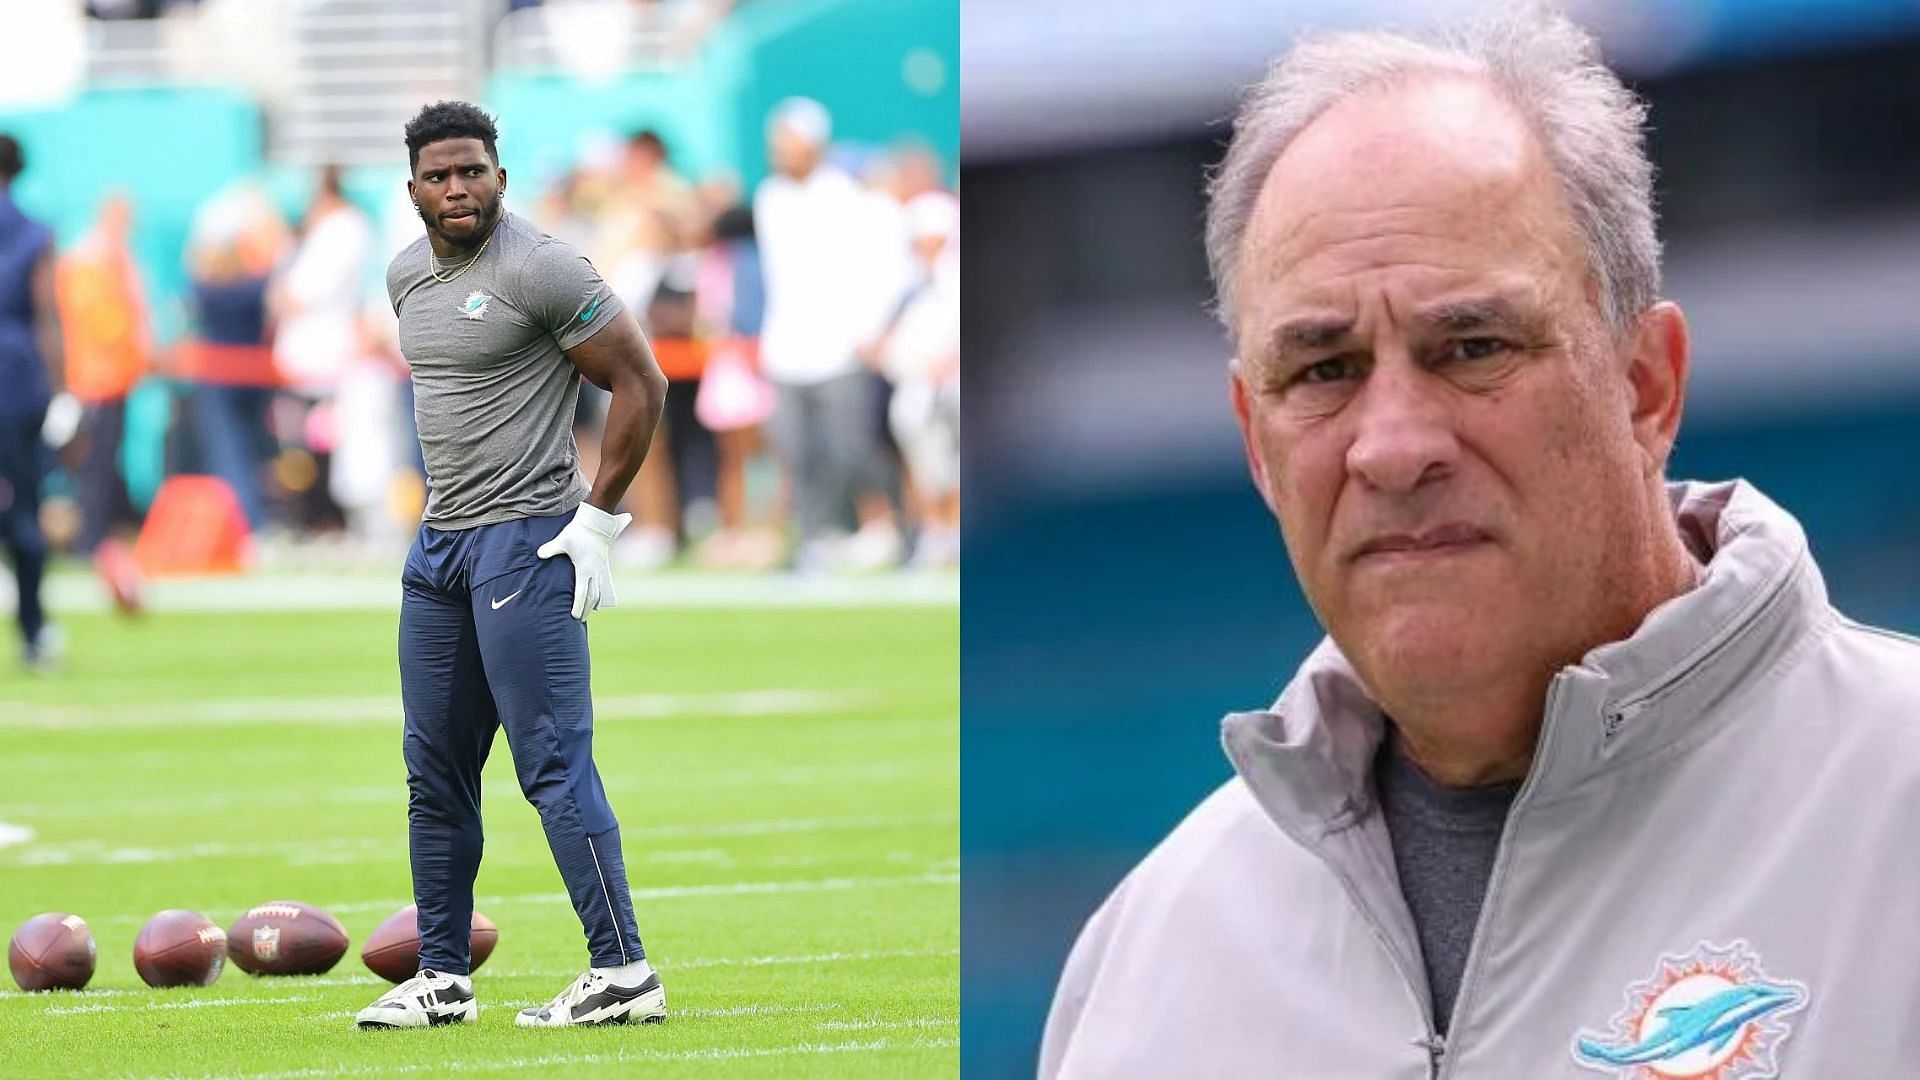 Tyreek Hill reacts to the Miami Dolphins losing defensive oordinator Vic Fangio